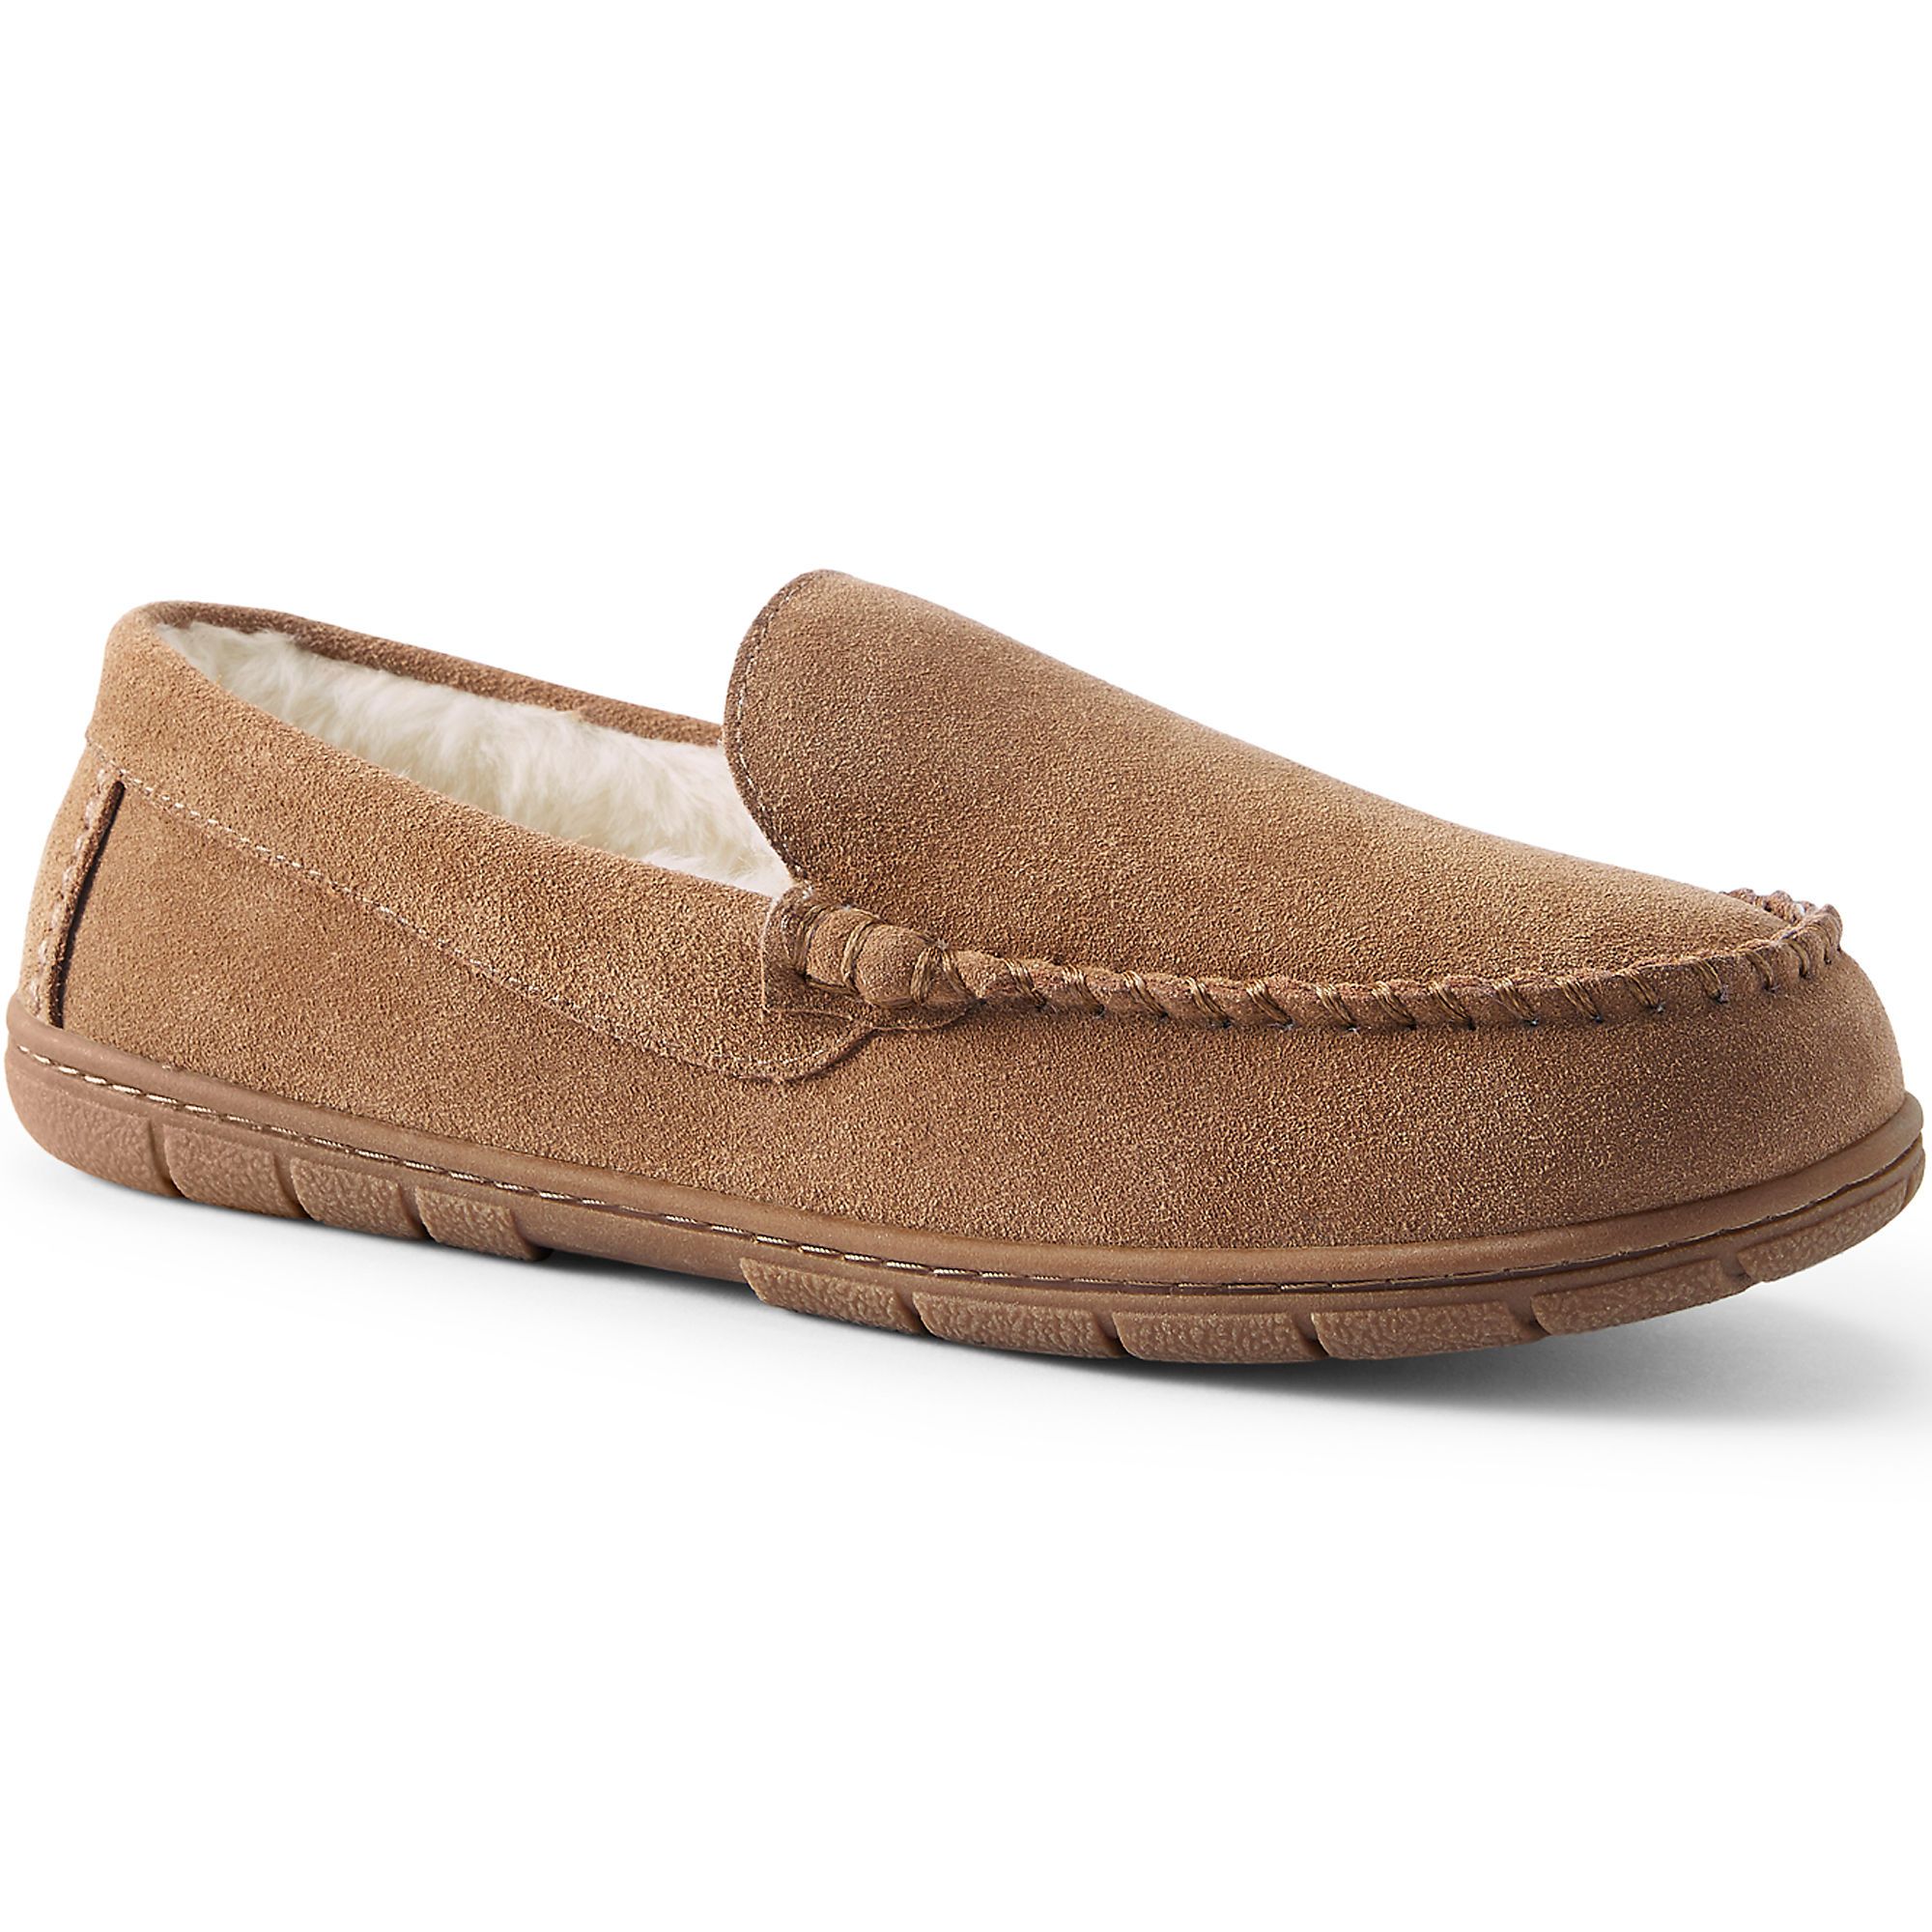 Men's Suede Leather Moccasin Slippers | Lands' End (US)